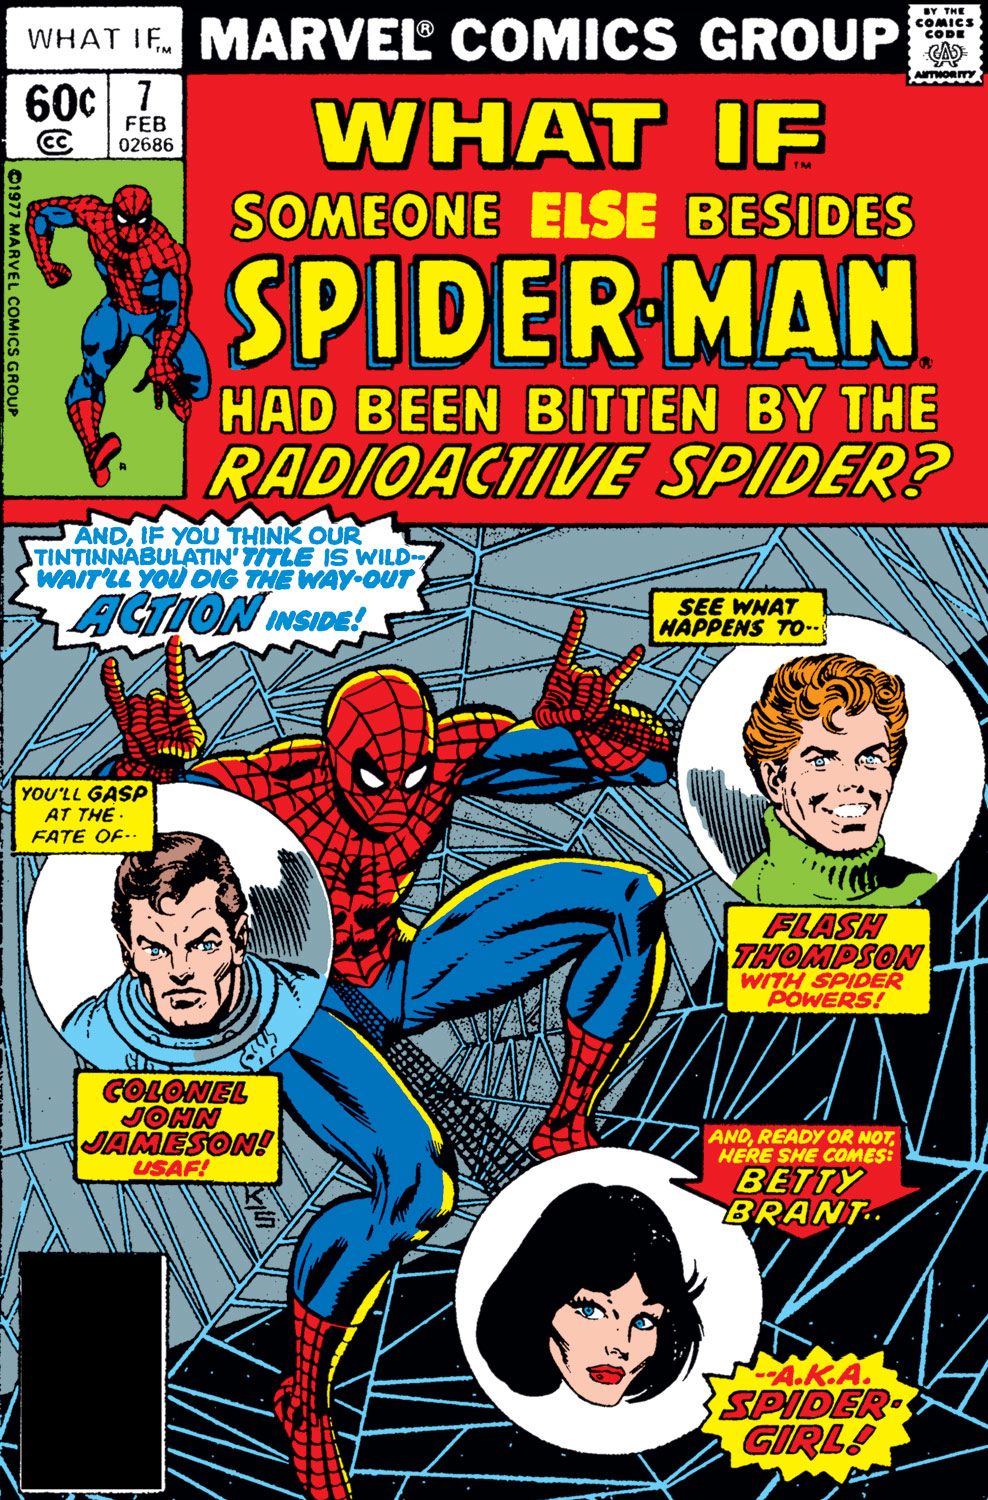 What If? (1977) issue 7 - Someone else besides Spider-Man had been bitten by a radioactive spider - Page 1